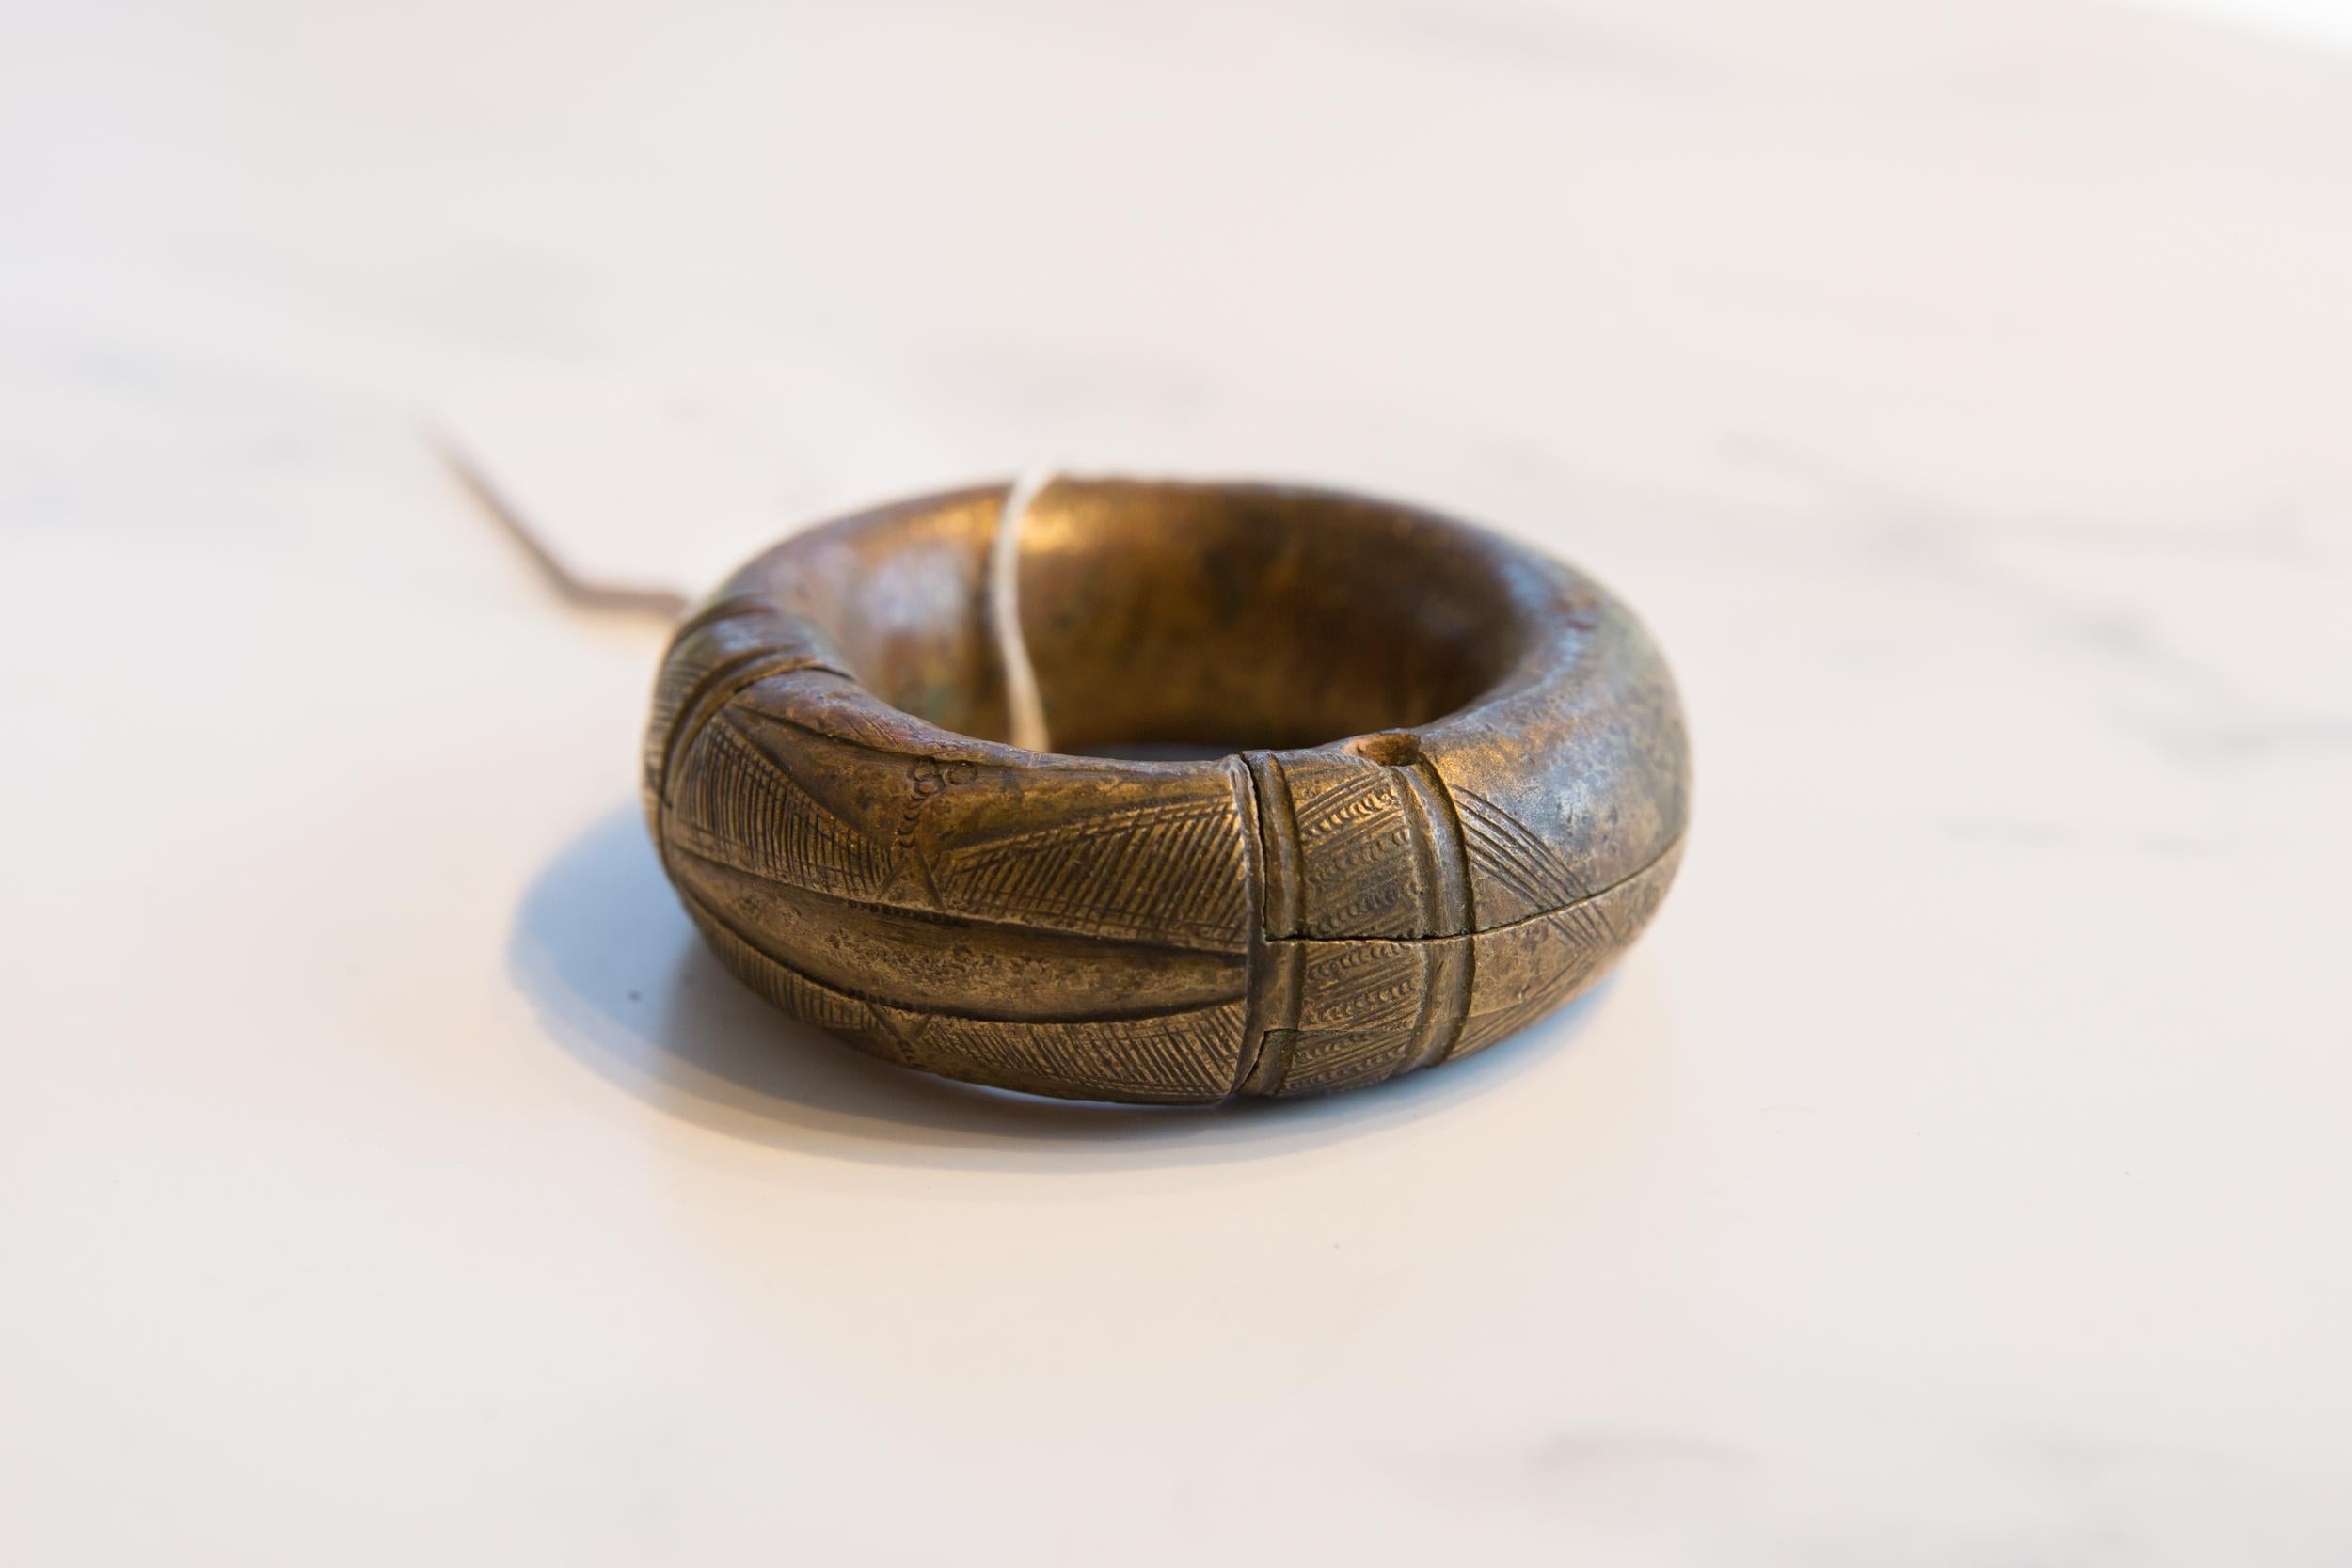 :: Antique handmade African small thick bronze bracelet with geometric detailing. Exceptional antique circa 19th century or older bracelet, possibly used as currency. This piece is unique collectible, with great craftsmanship having gone into its